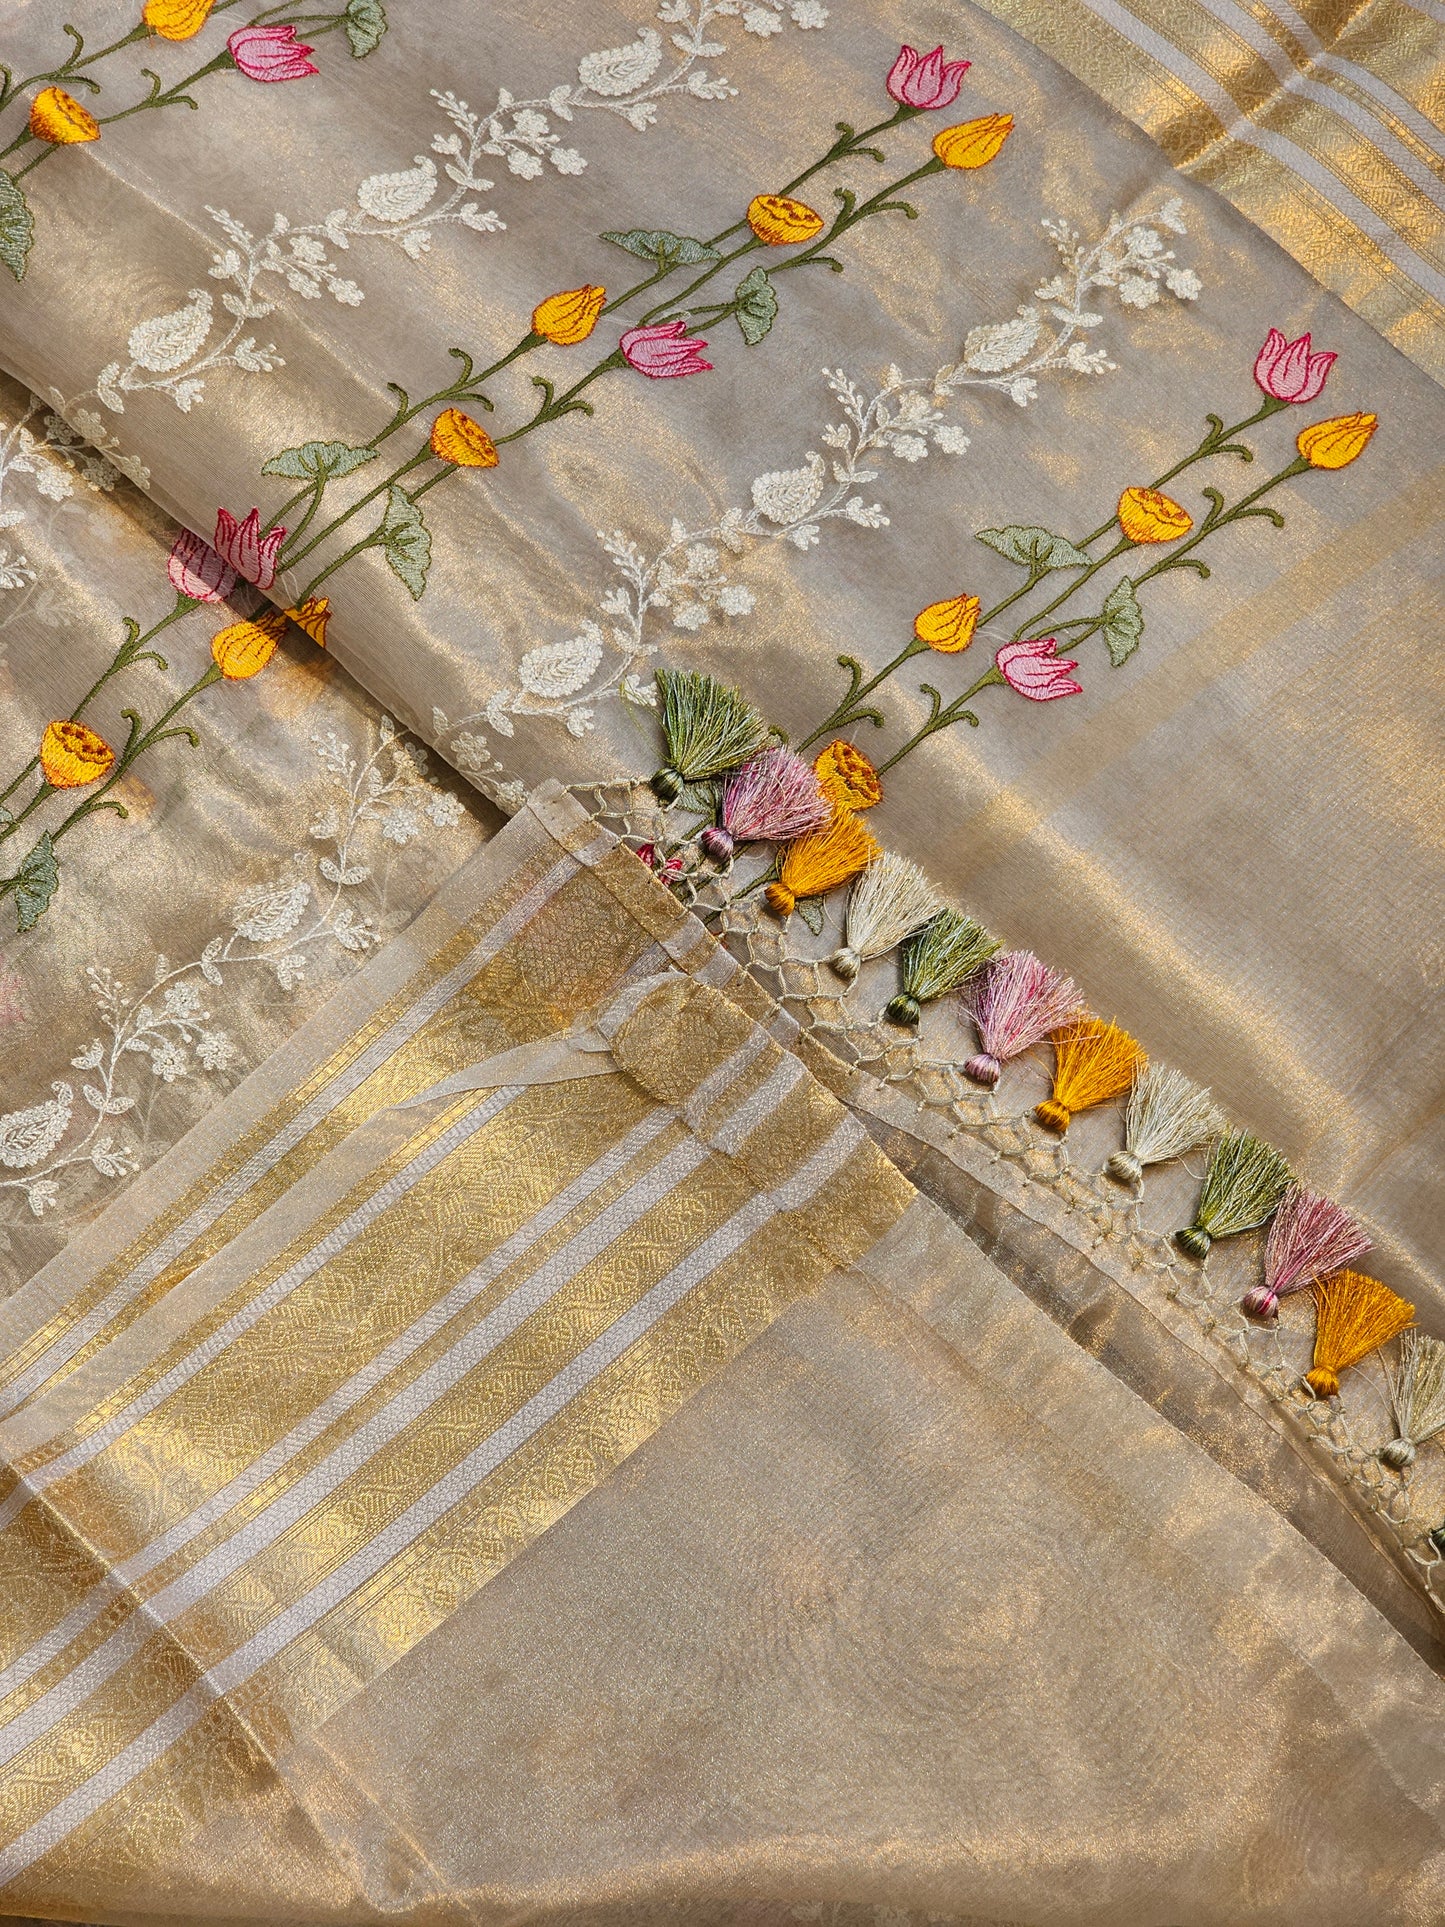 Pure Tissue Silk Pichwai Latar Embroidery Saree & Katan Border with special tassels and sleeves in blouse